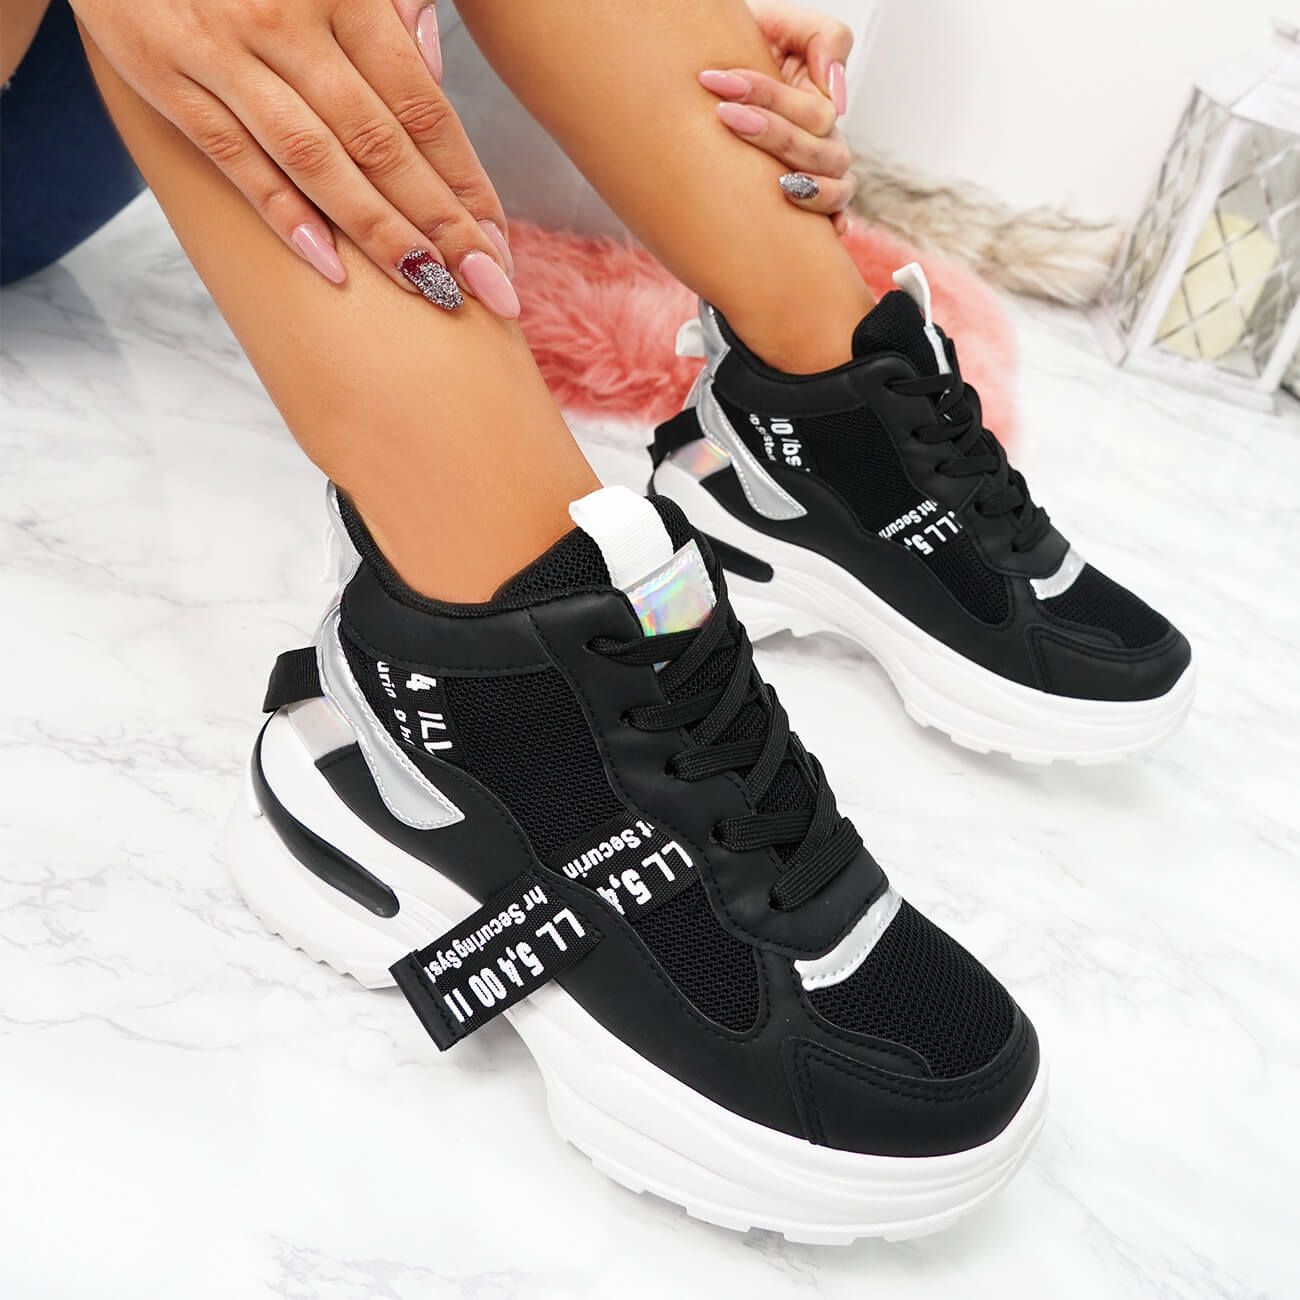 NEW WOMENS LADIES HIGH TOP SNEAKERS CHUNKY TRAINERS SPORTS ...